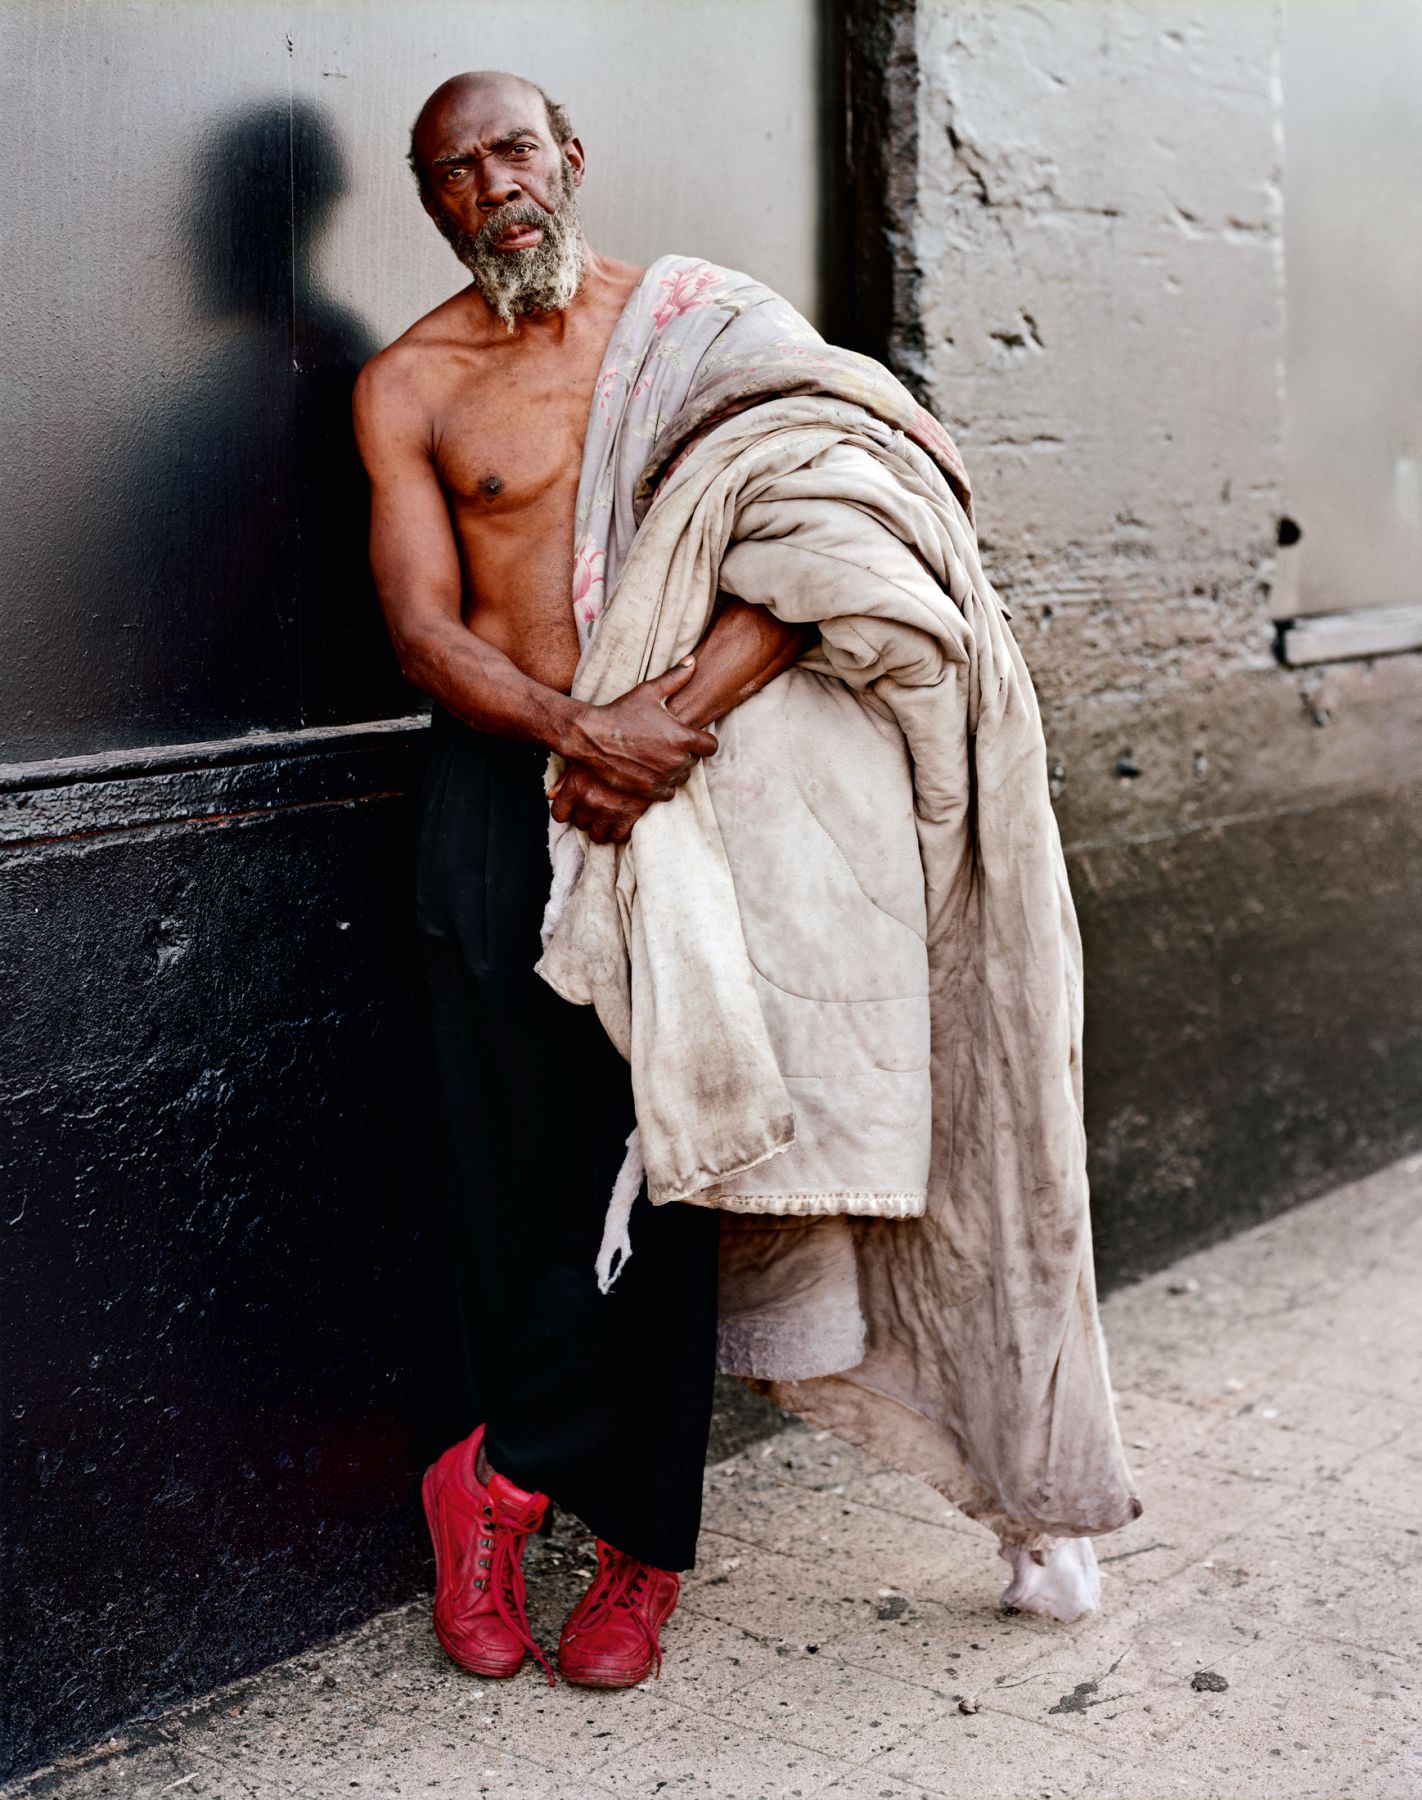 9_A Homeless Man With His Bedding, New York, New York, July 1993.jpeg